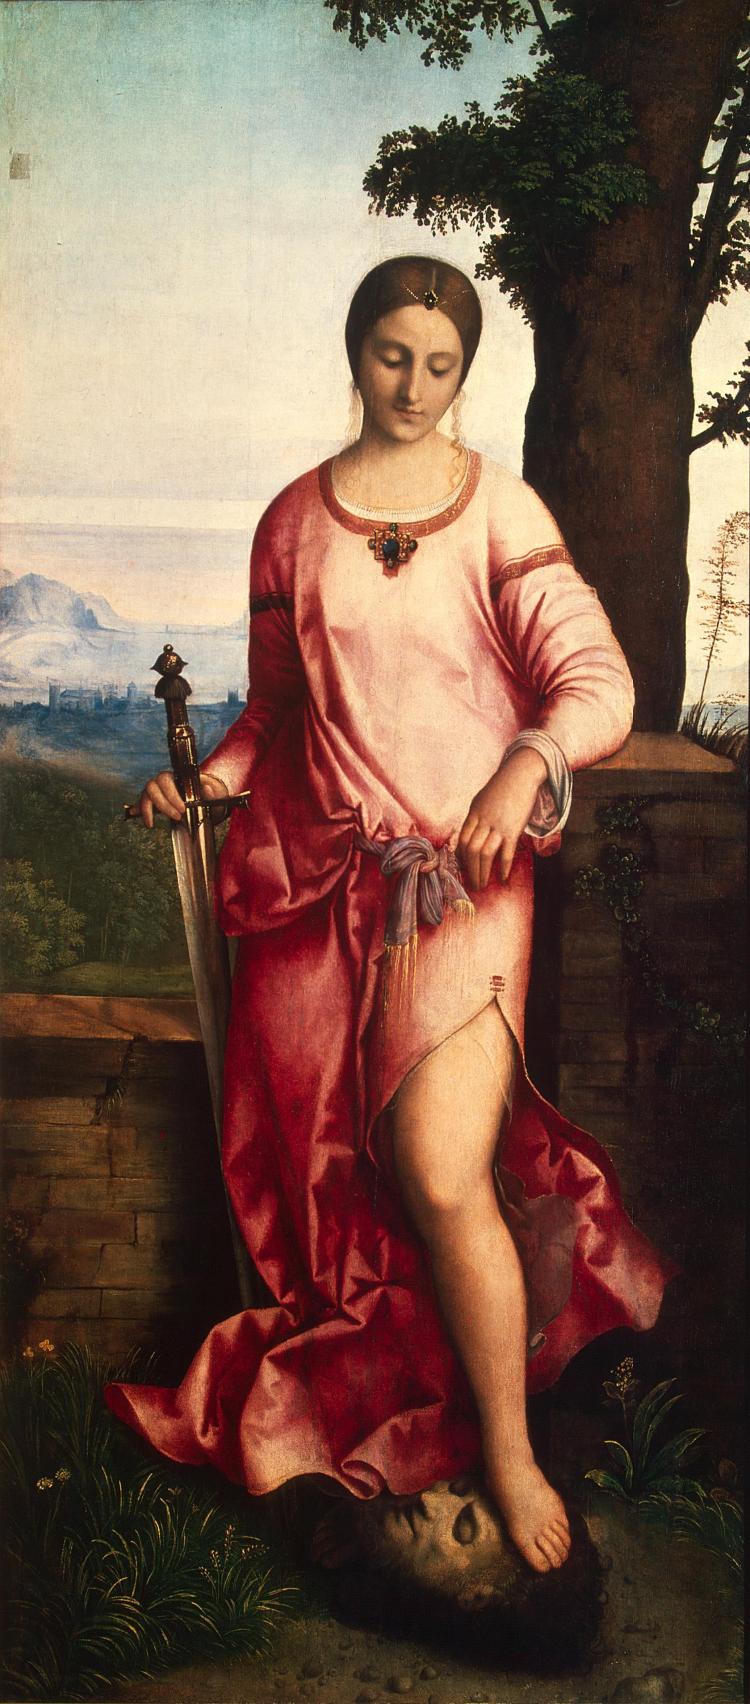 Giorgione, Judith with the head of Holofernes